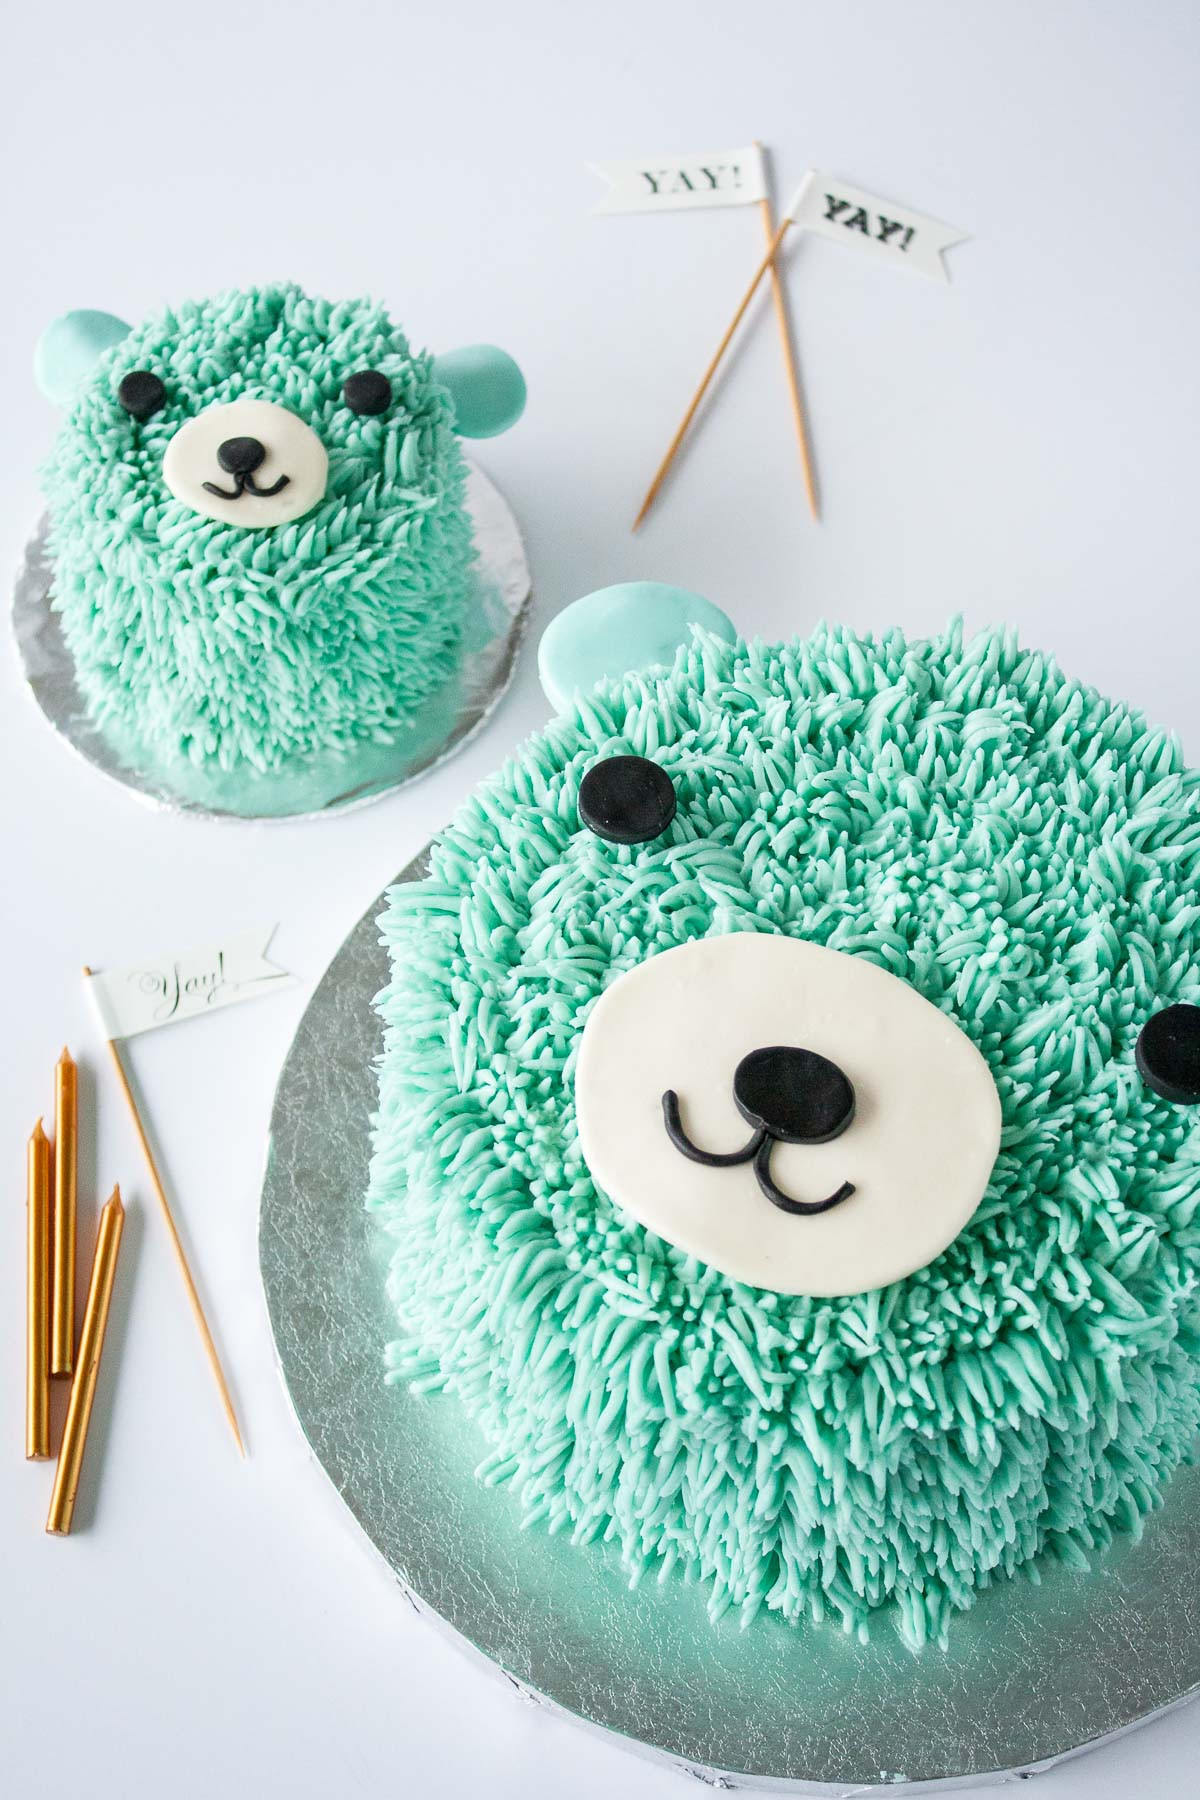 Baby Cake Decoration Ideas
 Roundup of the CUTEST Baby Shower Cakes Tutorials and